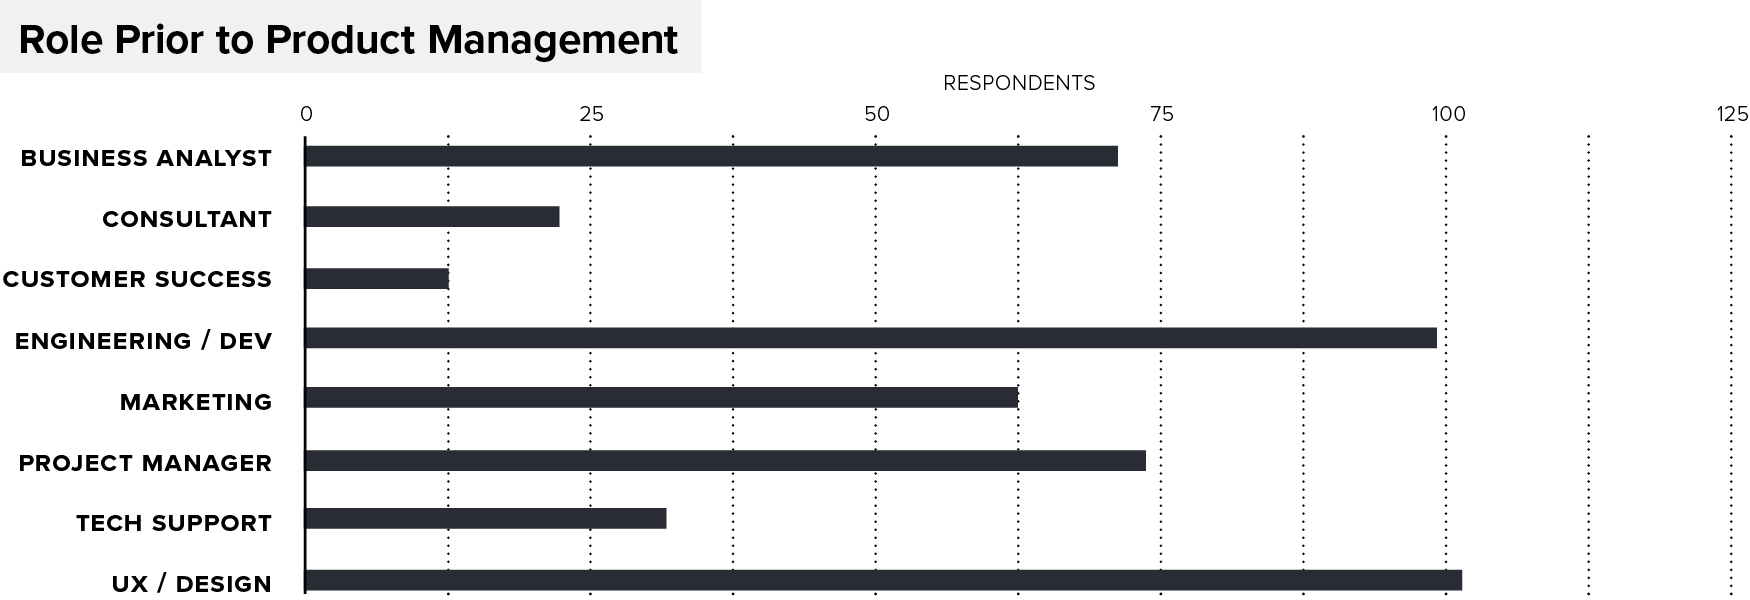 Survey Results Chart: Role Prior to Product Management